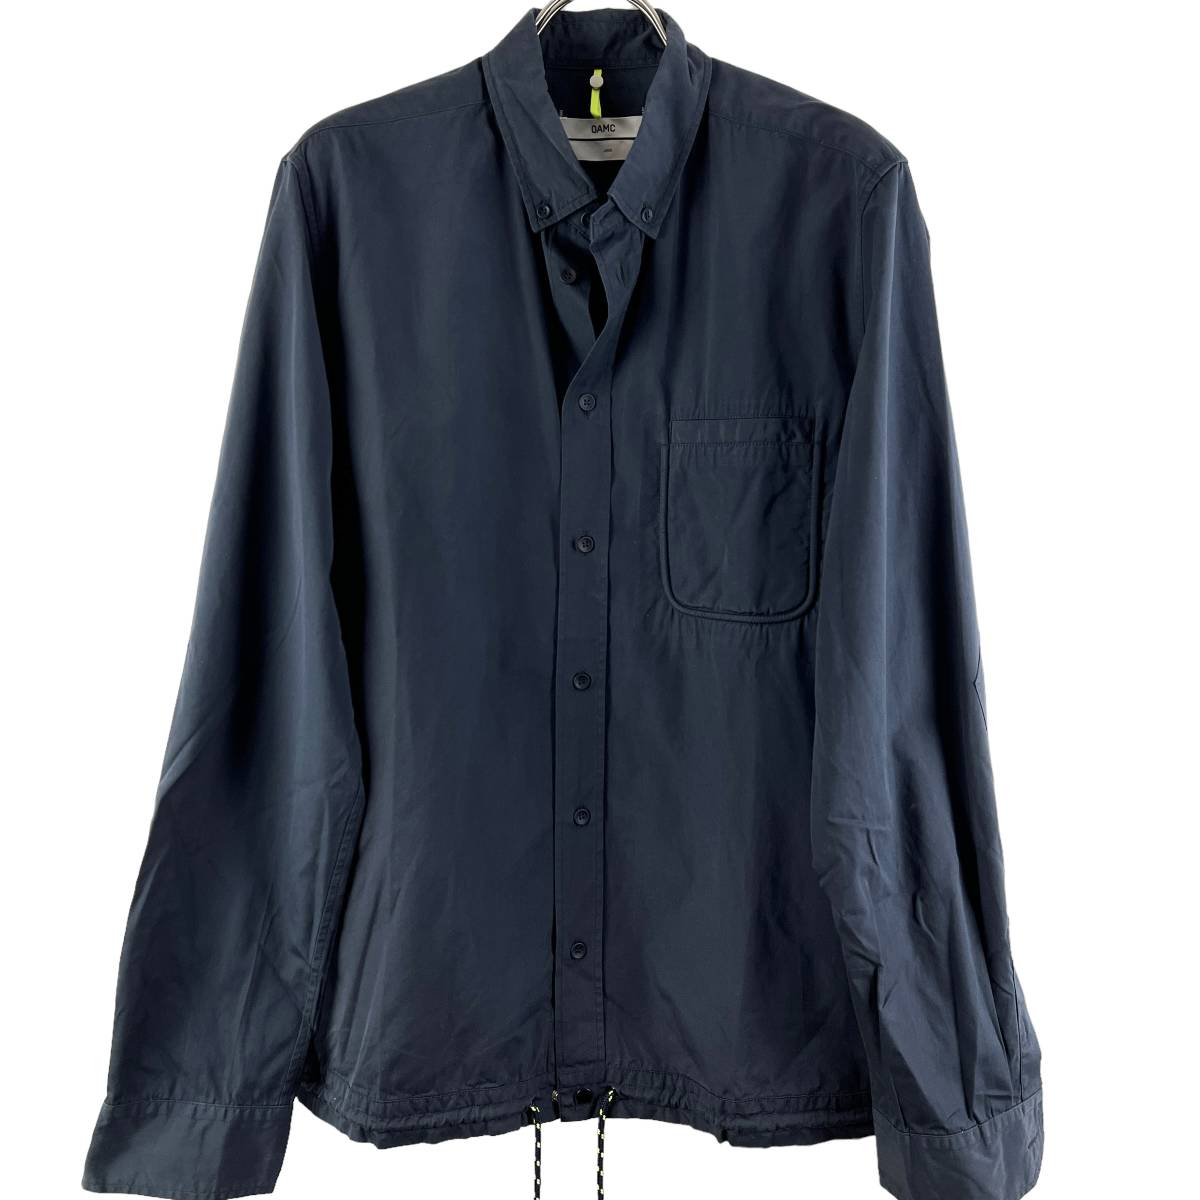 OAMC(オーエーエムシー) Stretched Adjustable Size Jacket (navy